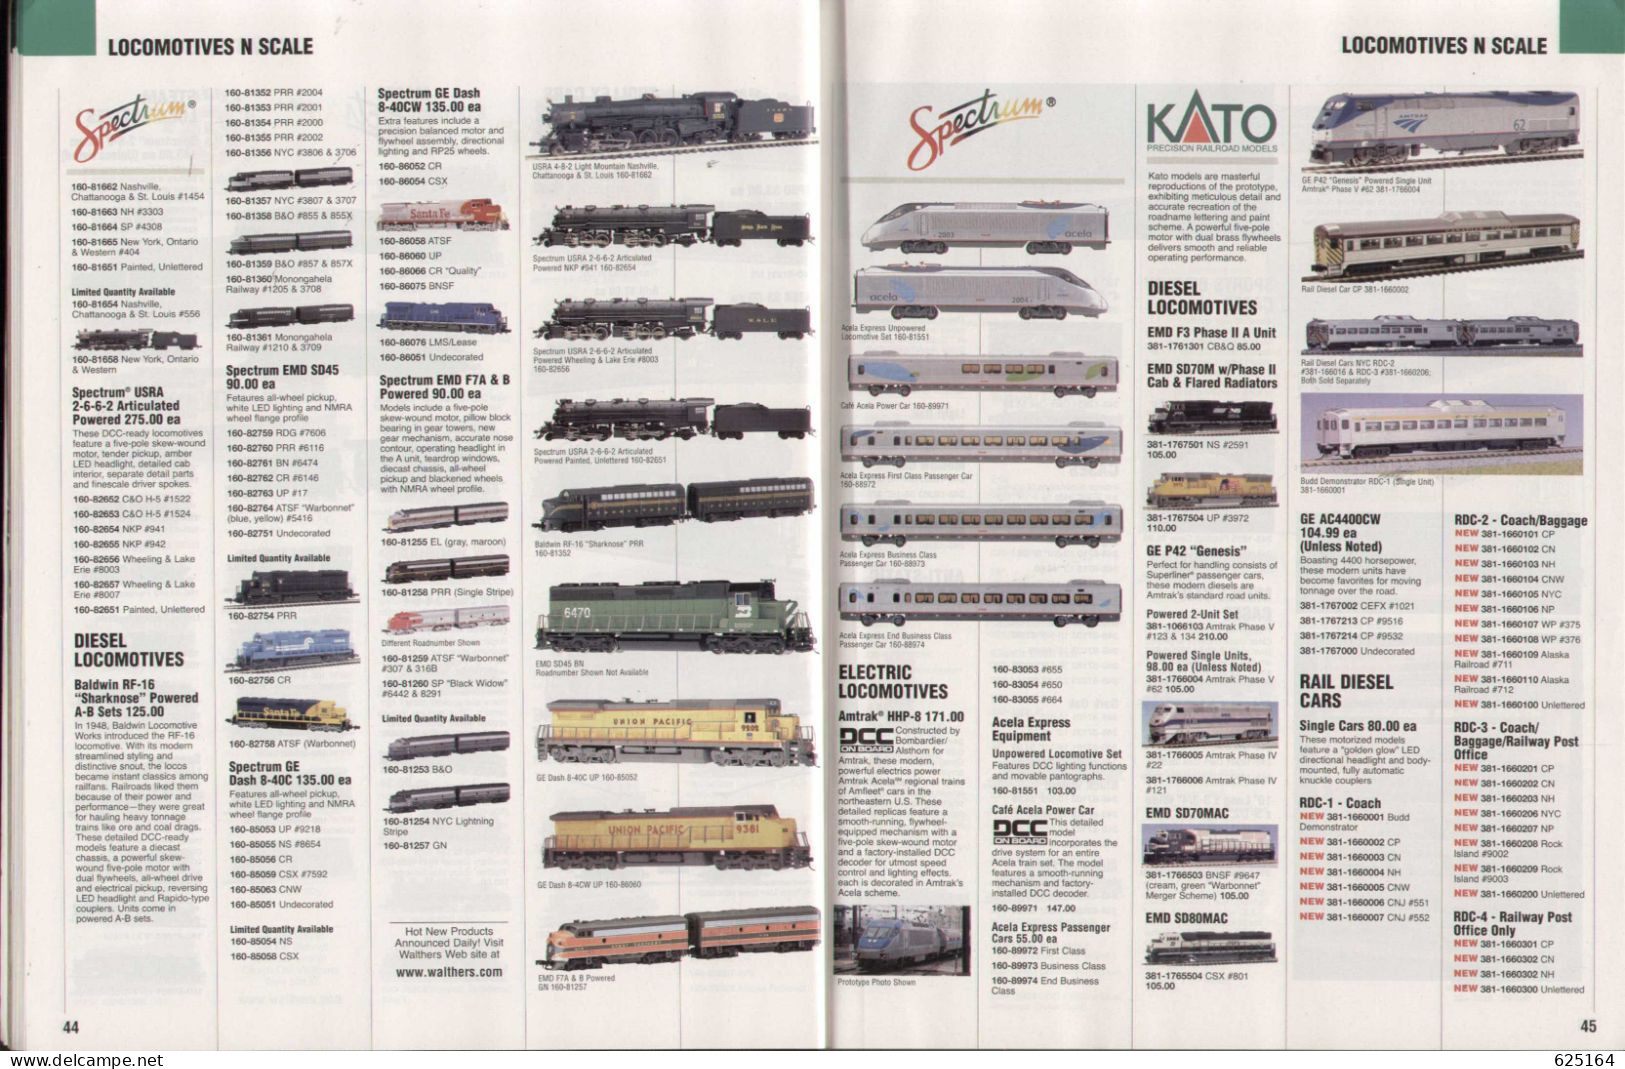 Catalogue WALTHERS 2007 75° - N & Z Gauge MODEL RAILROAD REFERENCE BOOK - Anglais